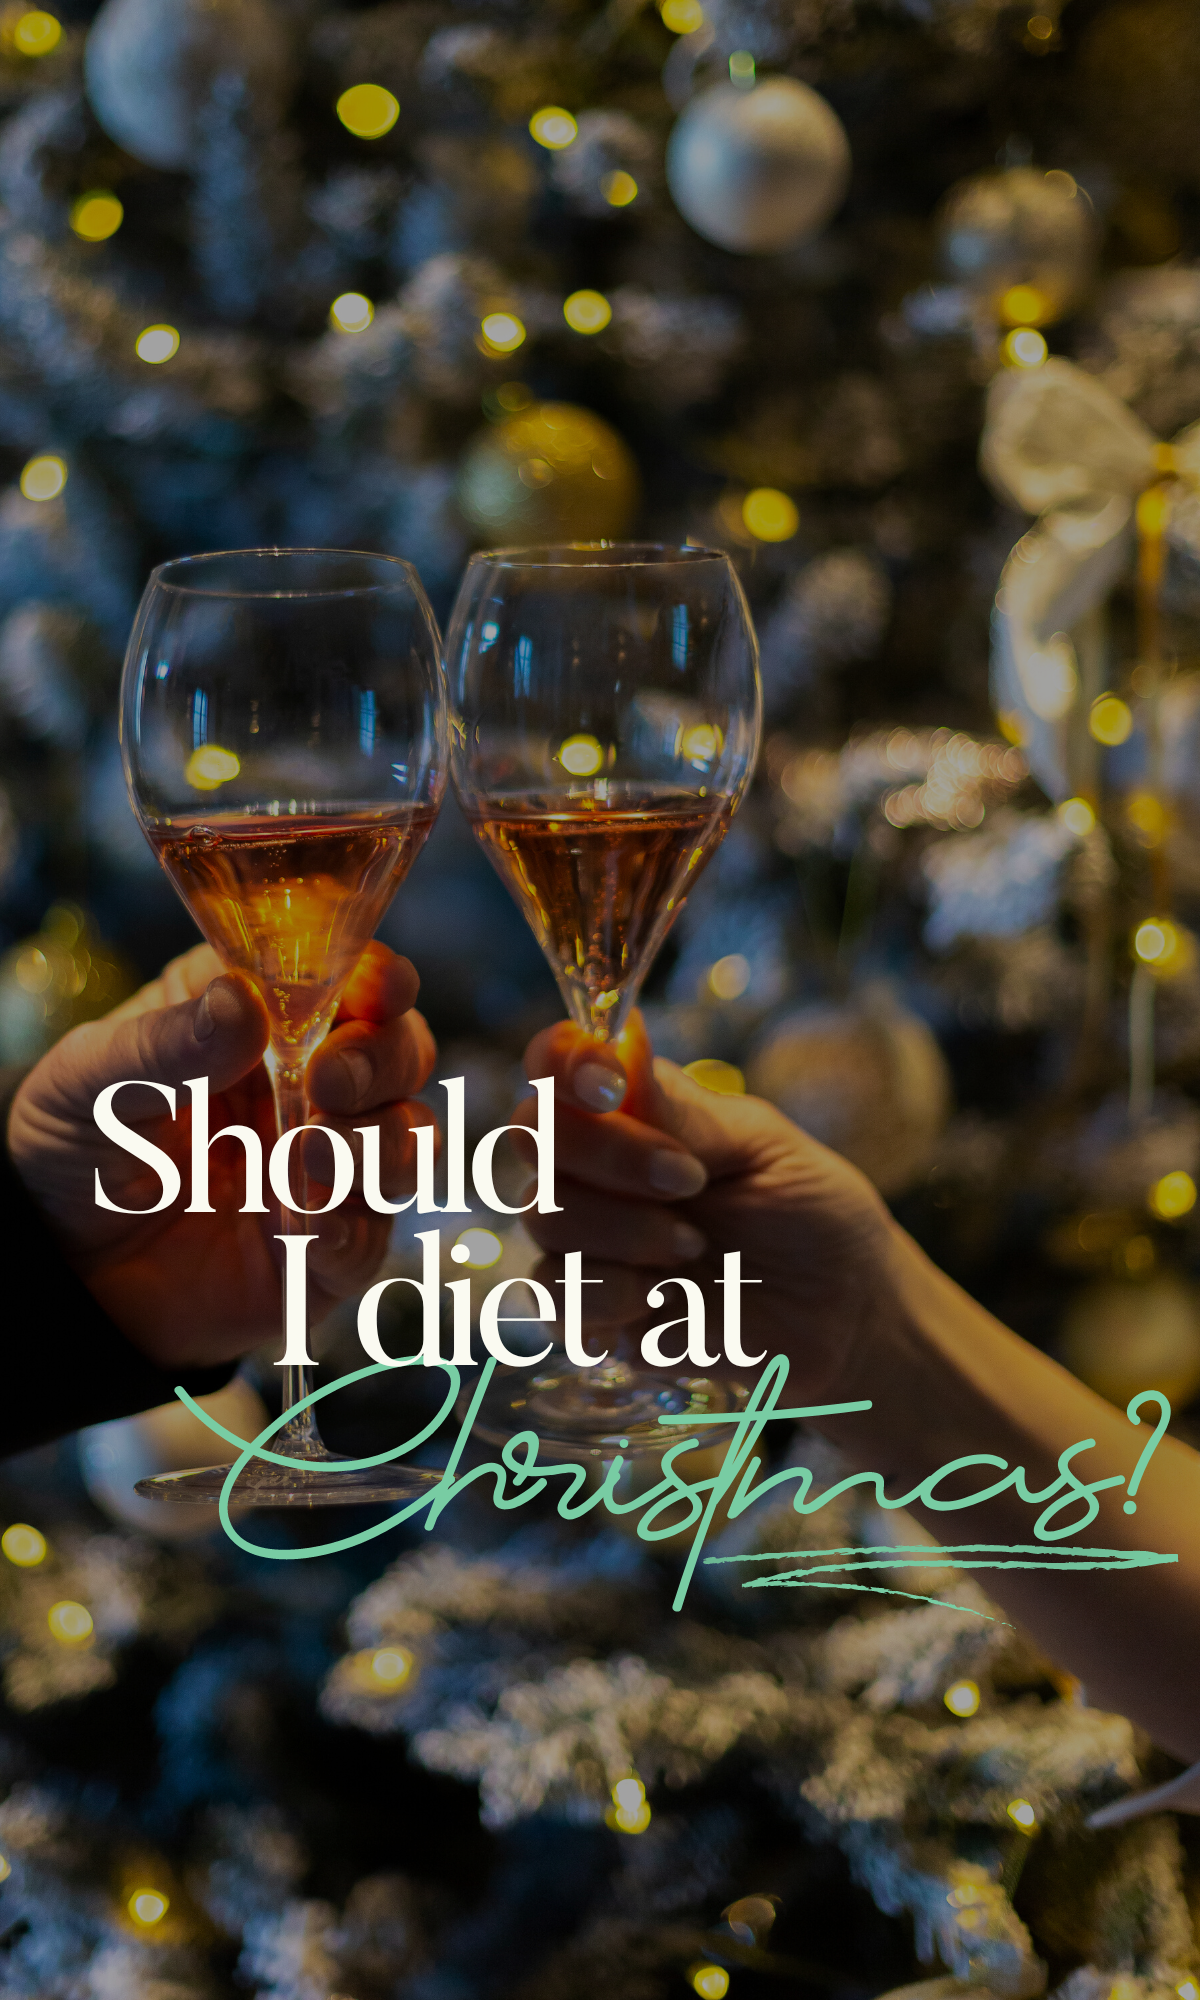 Should I diet at Christmas